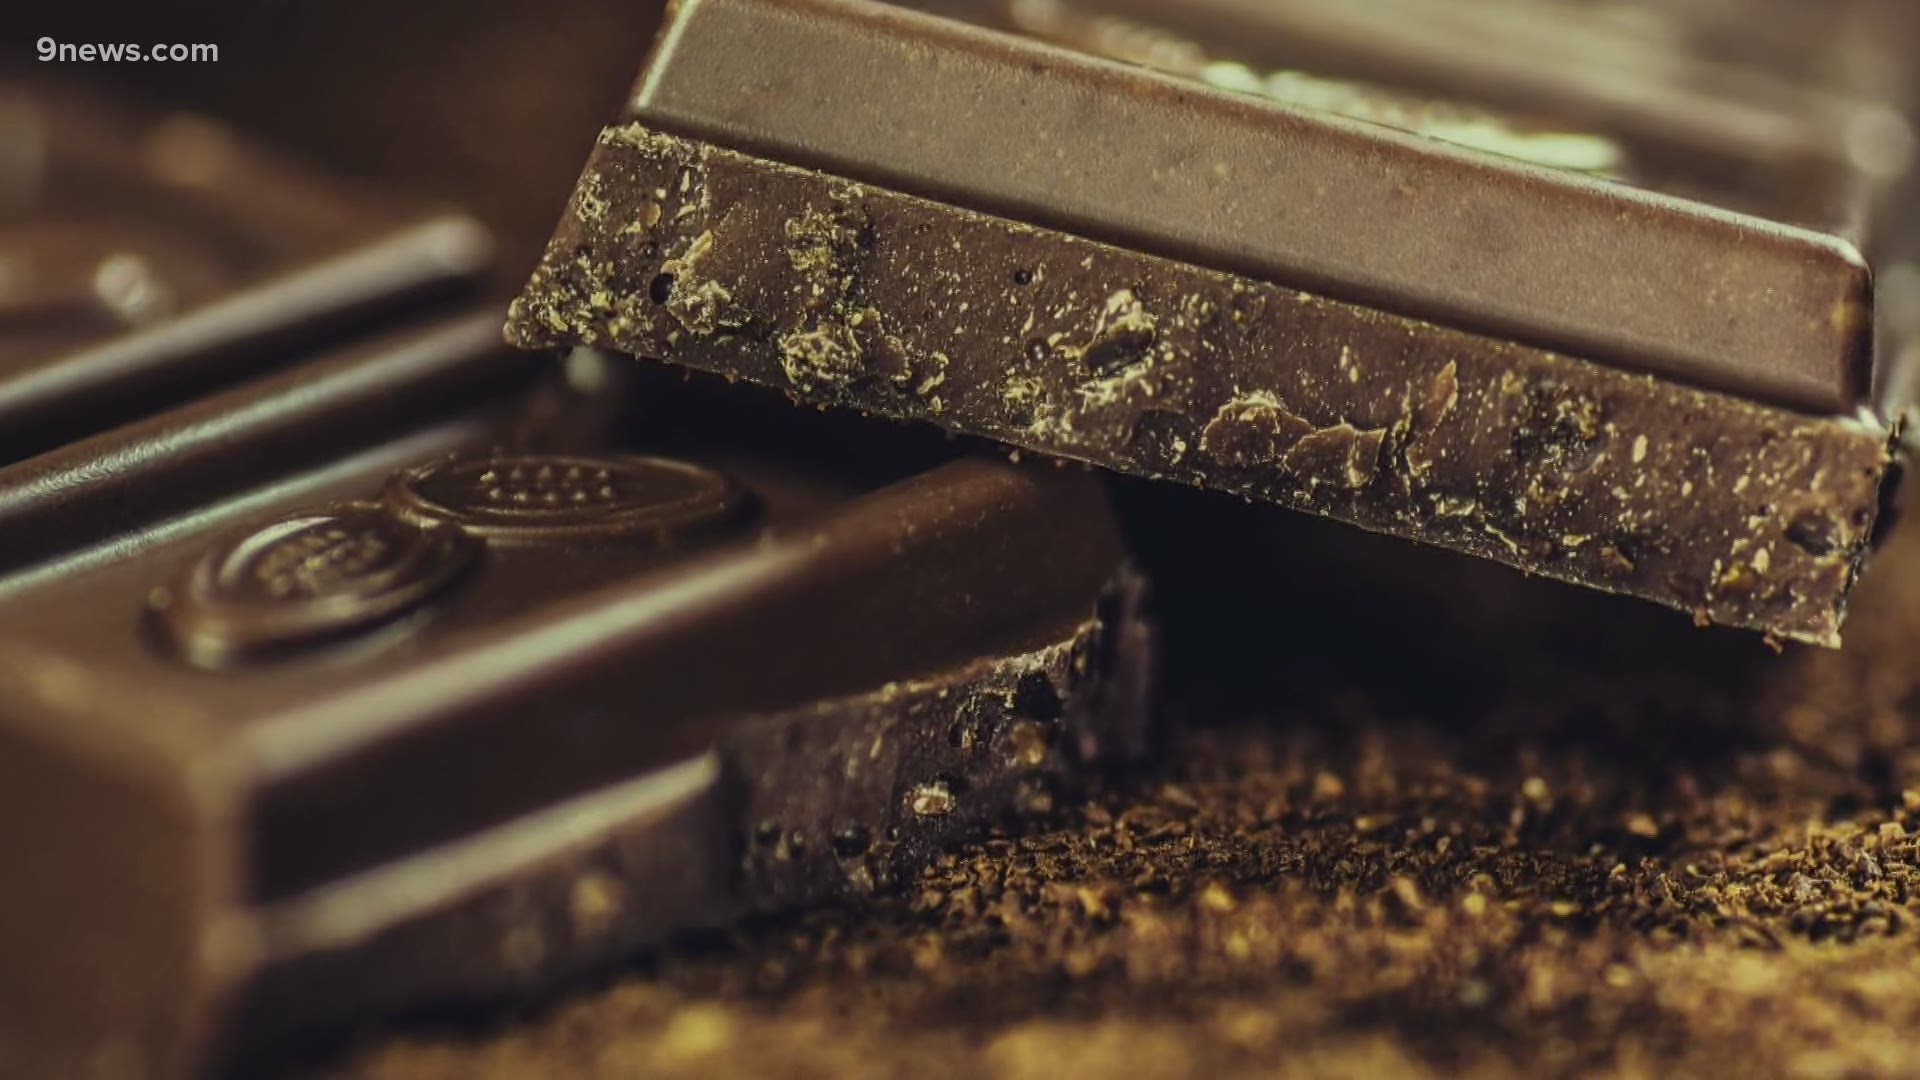 Chocolate has had a bad rap due to its fat and sugar content, but as it turns out, cacao (and some chocolate), has many health benefits.